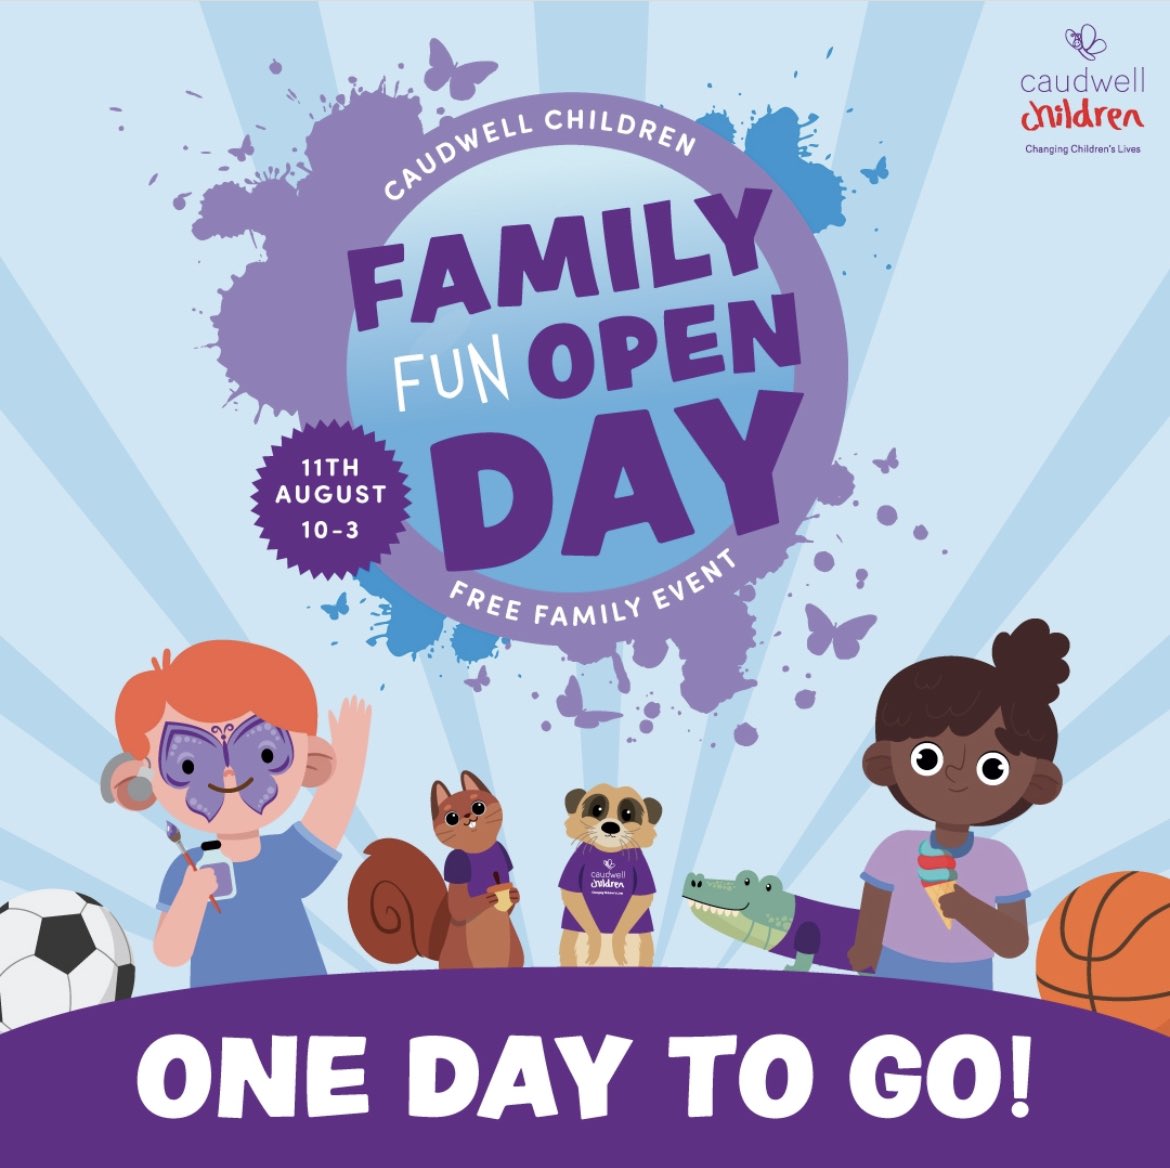 Caudwell Children's Family Fun Open Day is tomorrow!💜 It will be a fun-filled day where you can meet our “Purple People” staff, learn how our fantastic services can change your child’s life and participate in various fun activities.🎨👇🏽 fb.me/e/196dd2T1H #FamilyOpenDay